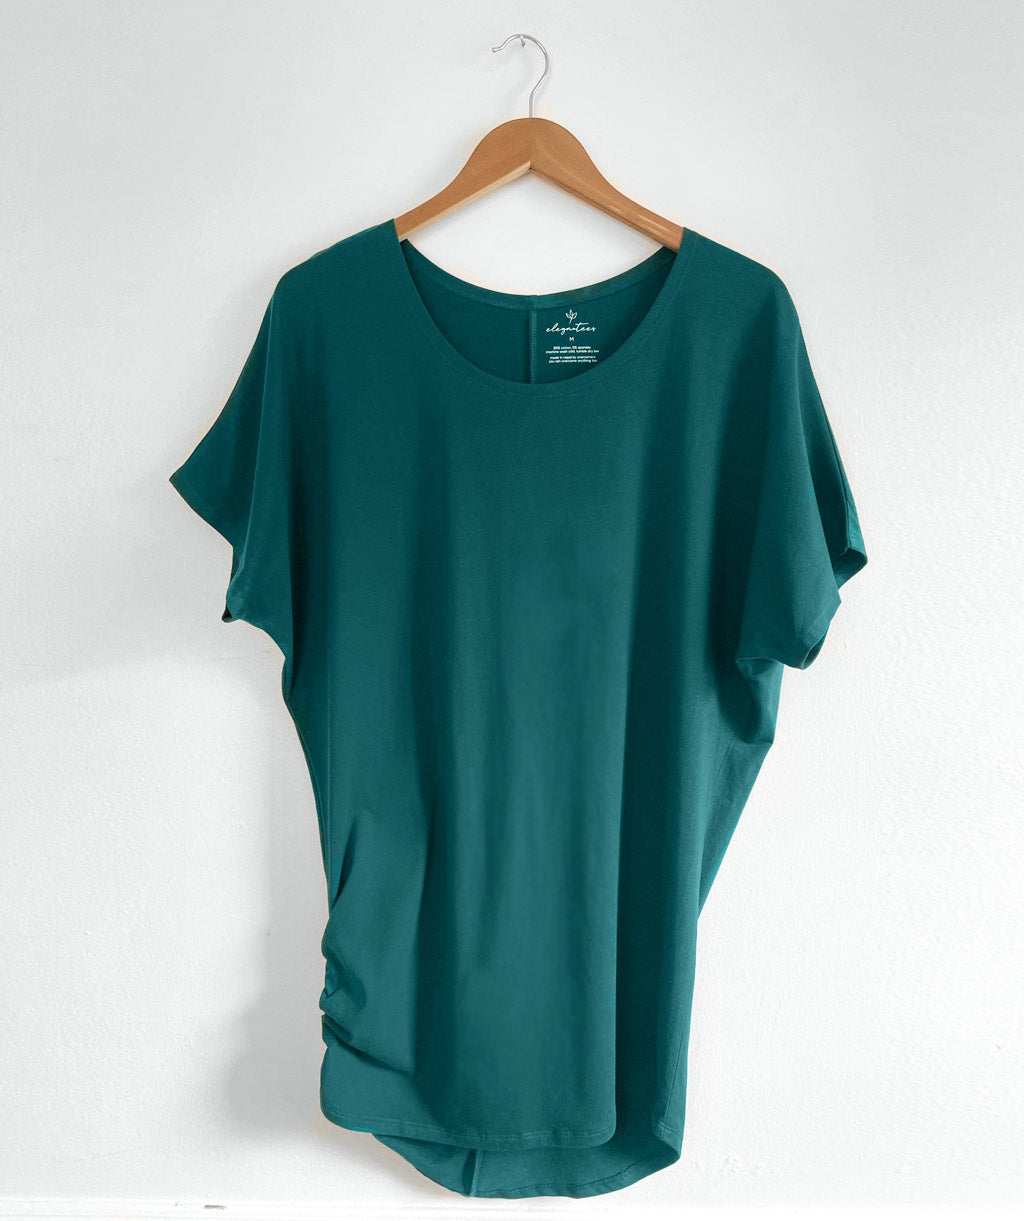 EMILY draped tunic in Shaded Spruce